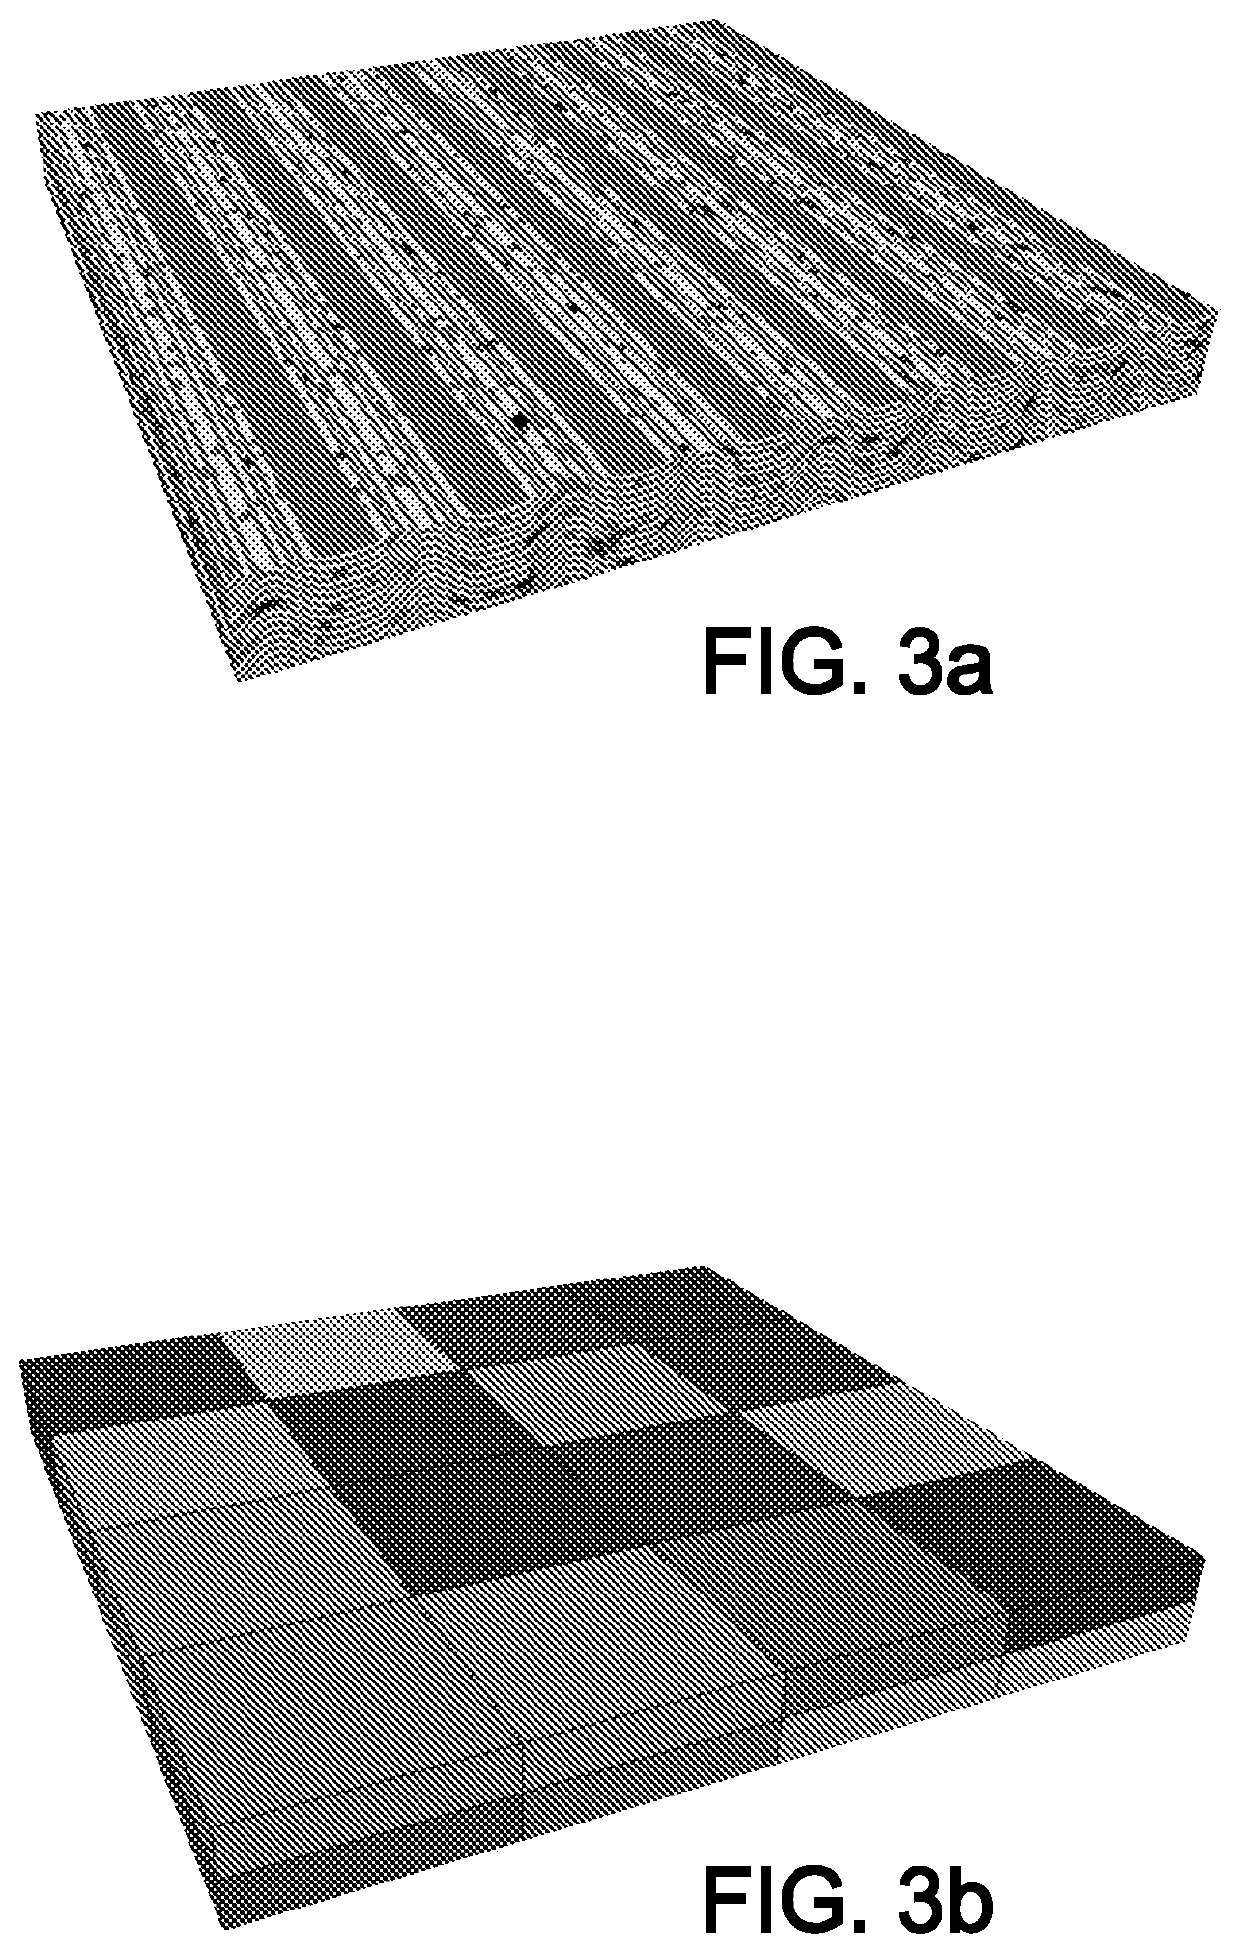 A method for forming coarse-scale 3D model of heterogeneous sedimentary structures